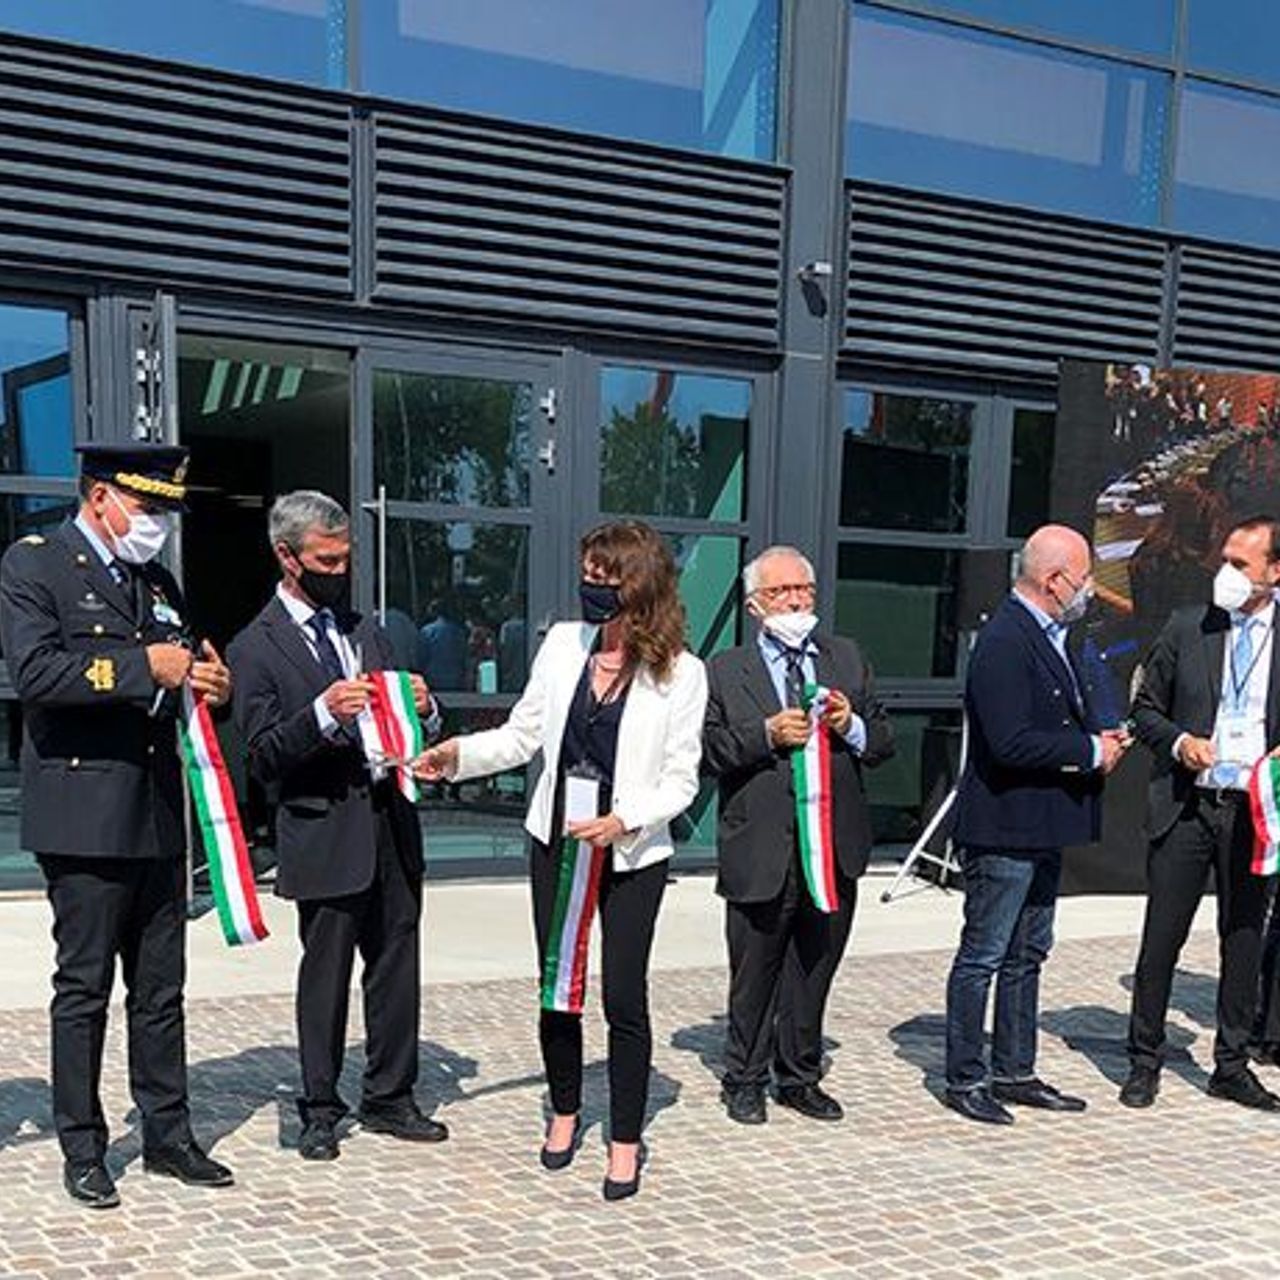 The inauguration ceremony of the Bologna office of the ECWMF, the European Center for Medium-Term Weather Forecasts (Photo Giacomo Maestri)